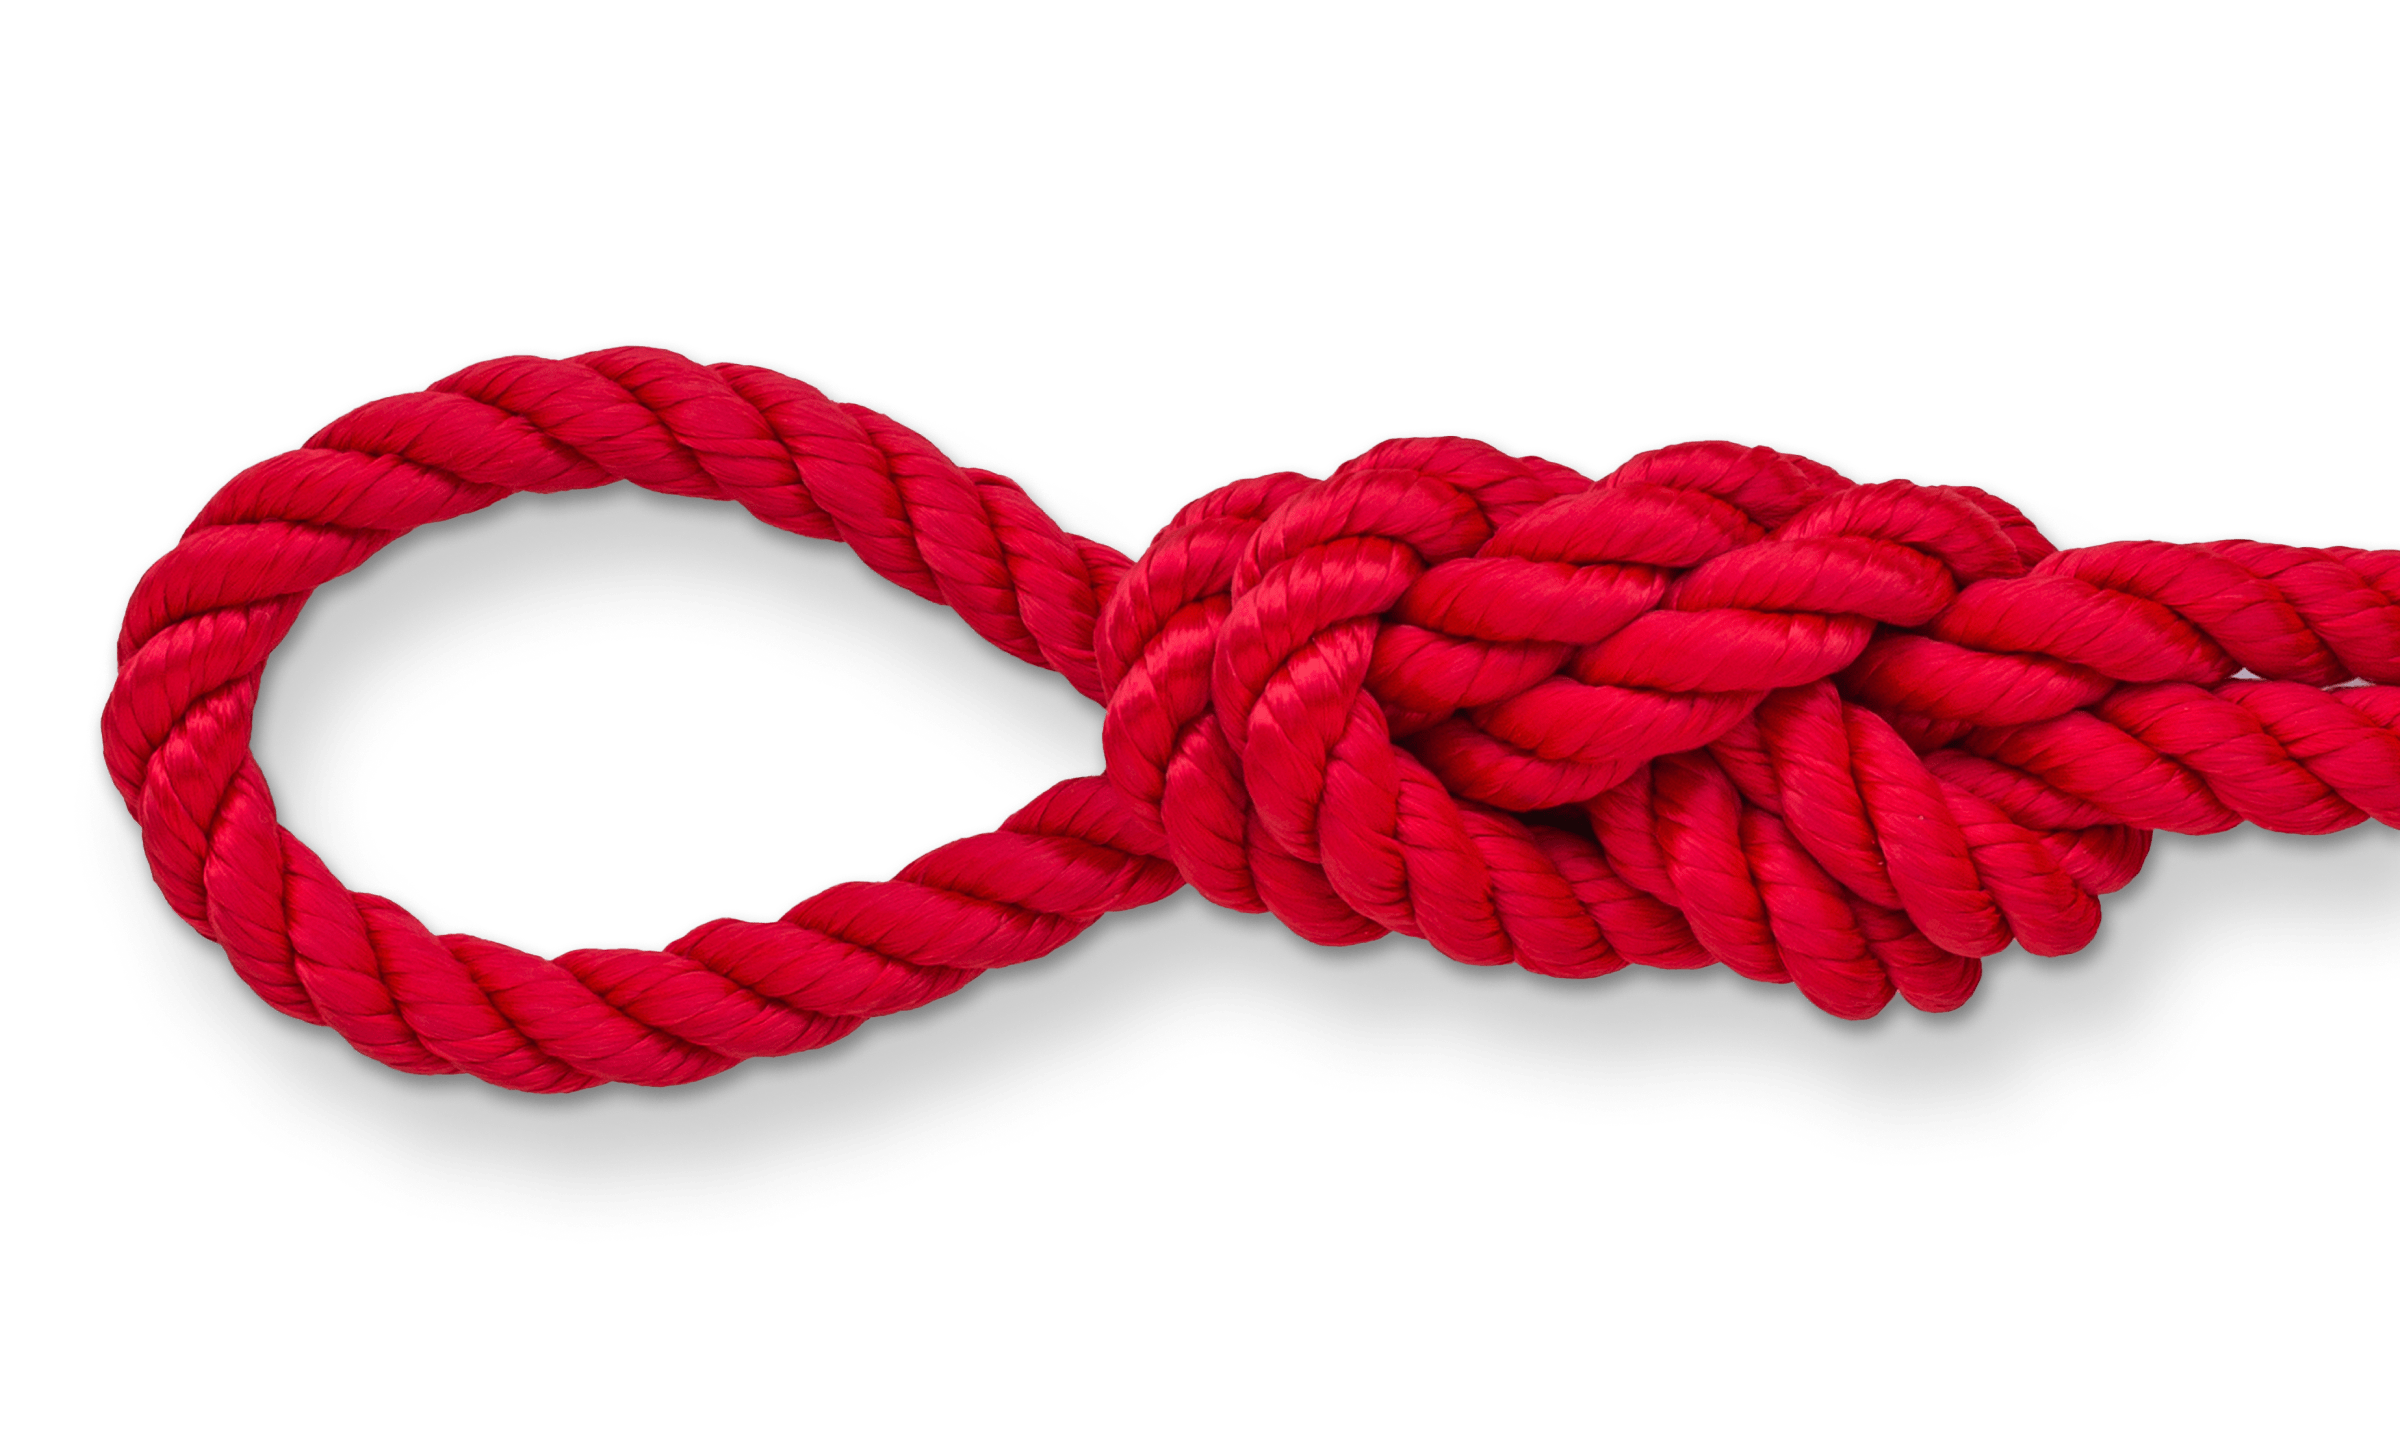 Triple-Strand Twisted Picture Hanging Cord - 1/4-inch Diameter